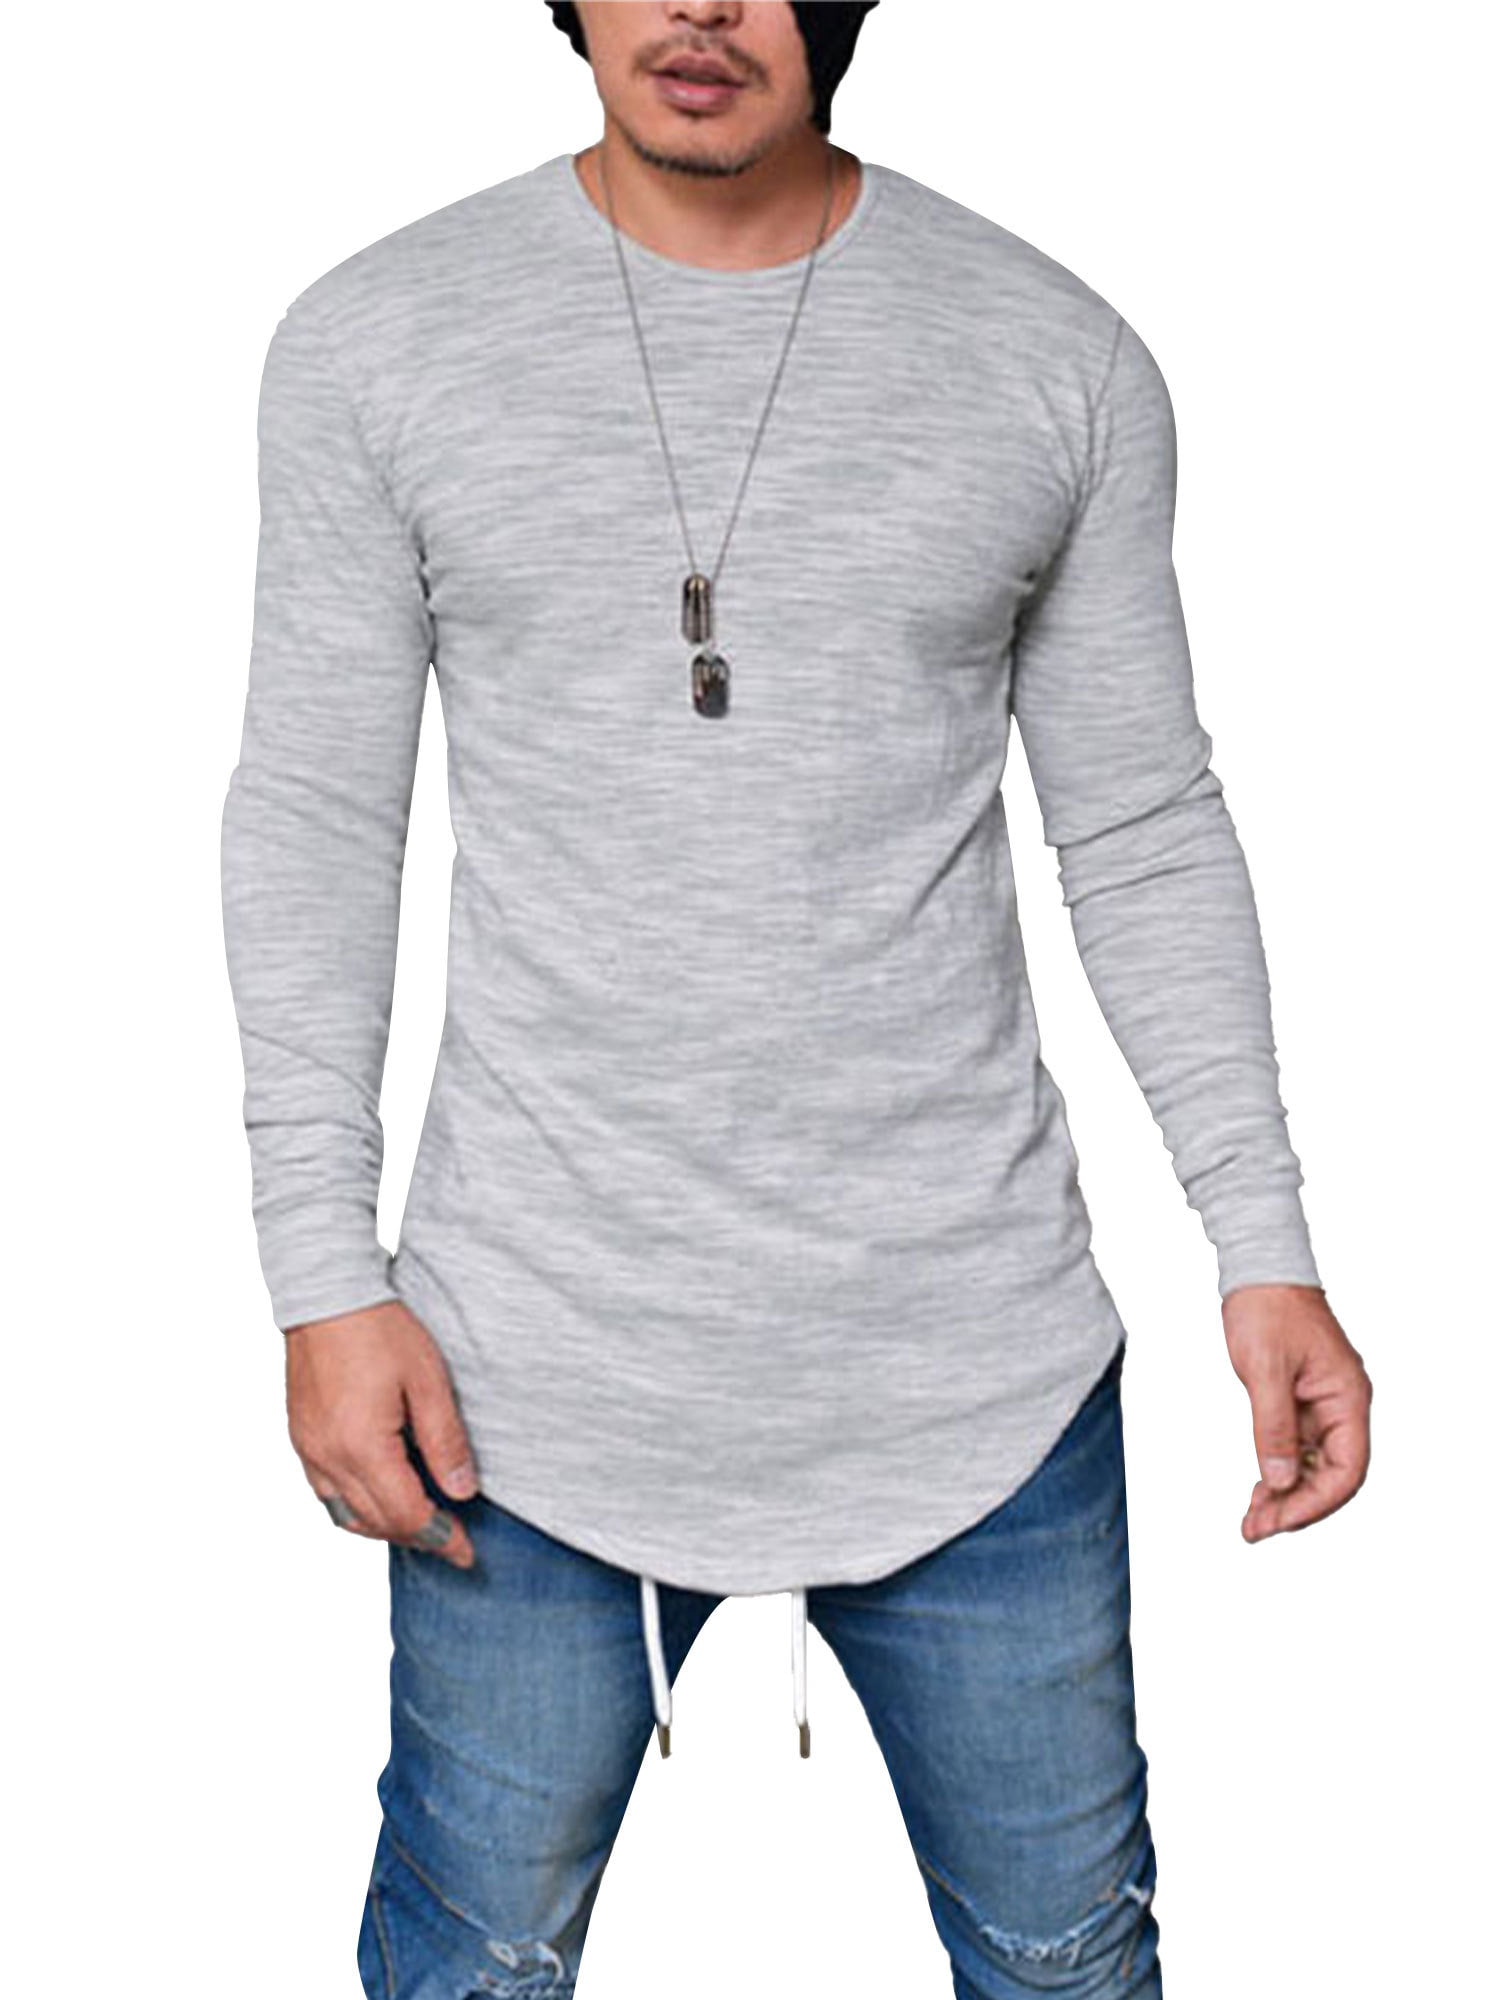 Fashion Men's Slim Fit O-Neck Long Sleeve Muscle Tee T-shirt Casual Tops Blouse 